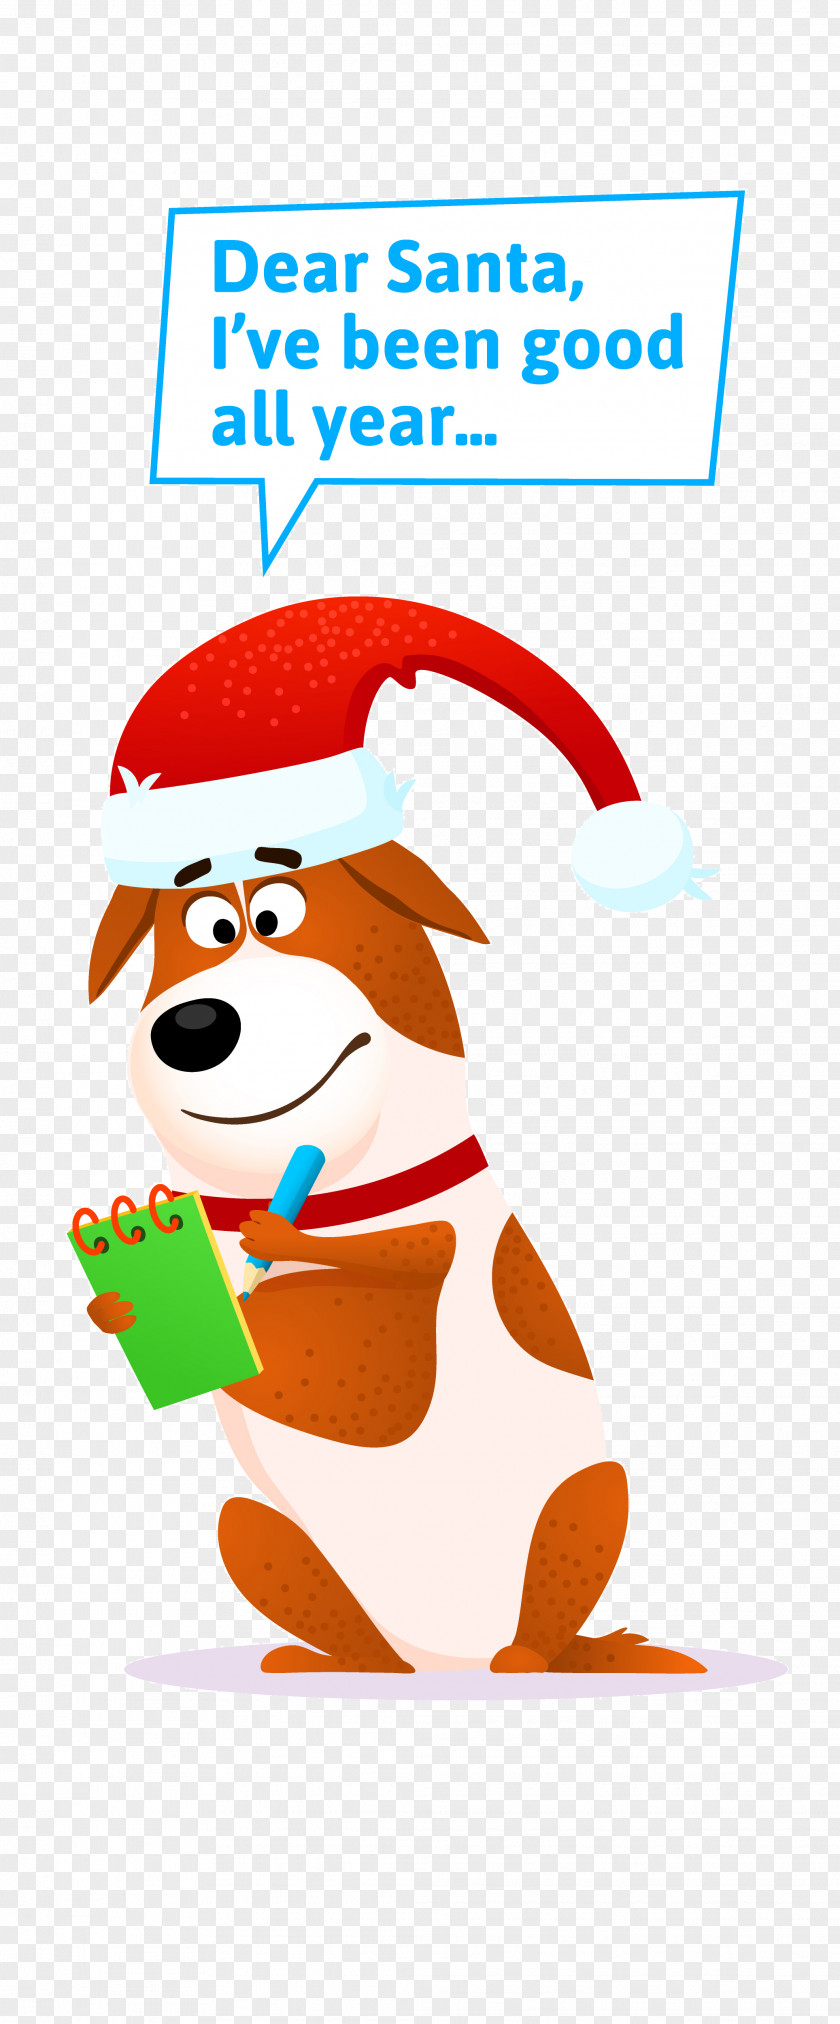 Search For Santa Paws Claus Illustration Christmas Day Cartoon Deer PNG